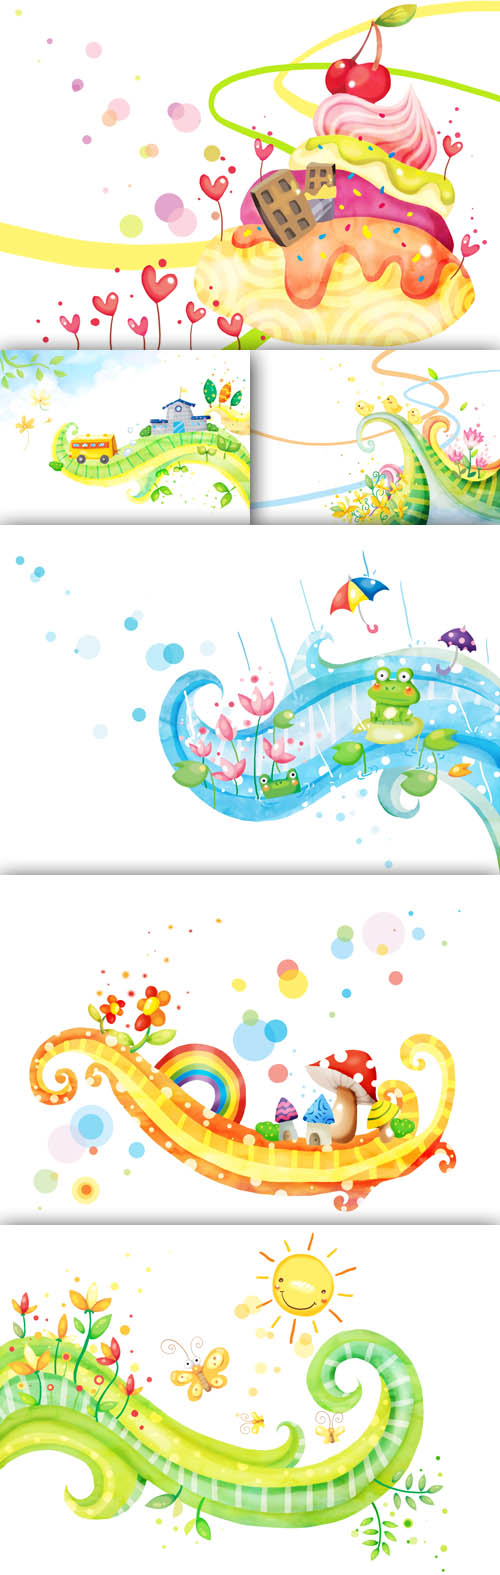 Abstract Spring Psd Backgrounds pack 2